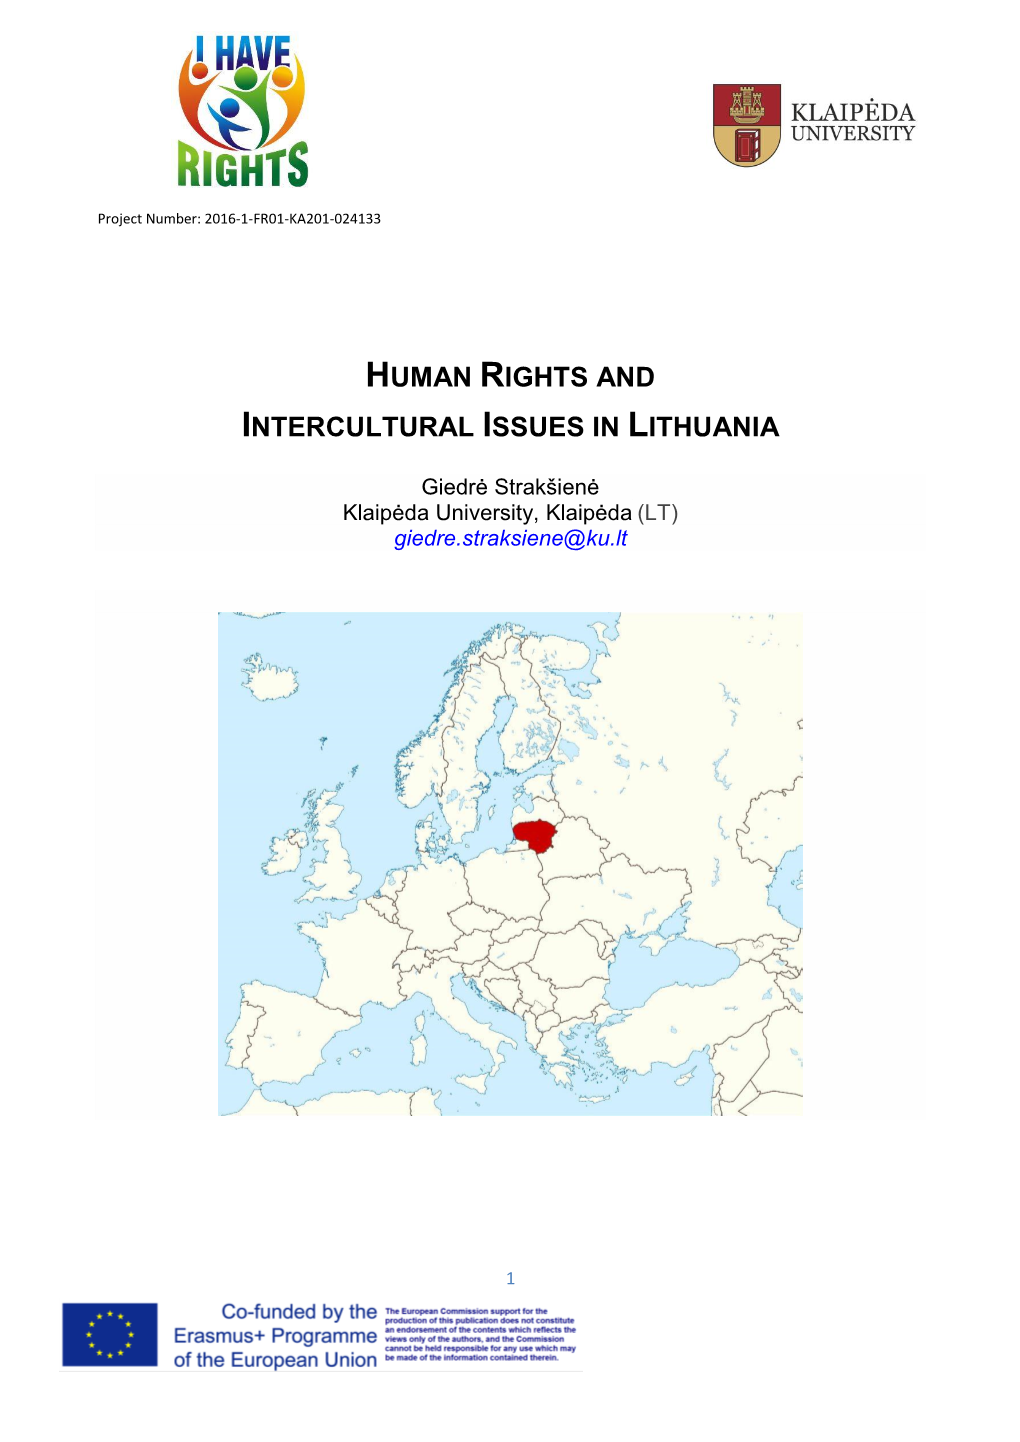 Human Rights and Intercultural Issues in Lithuania